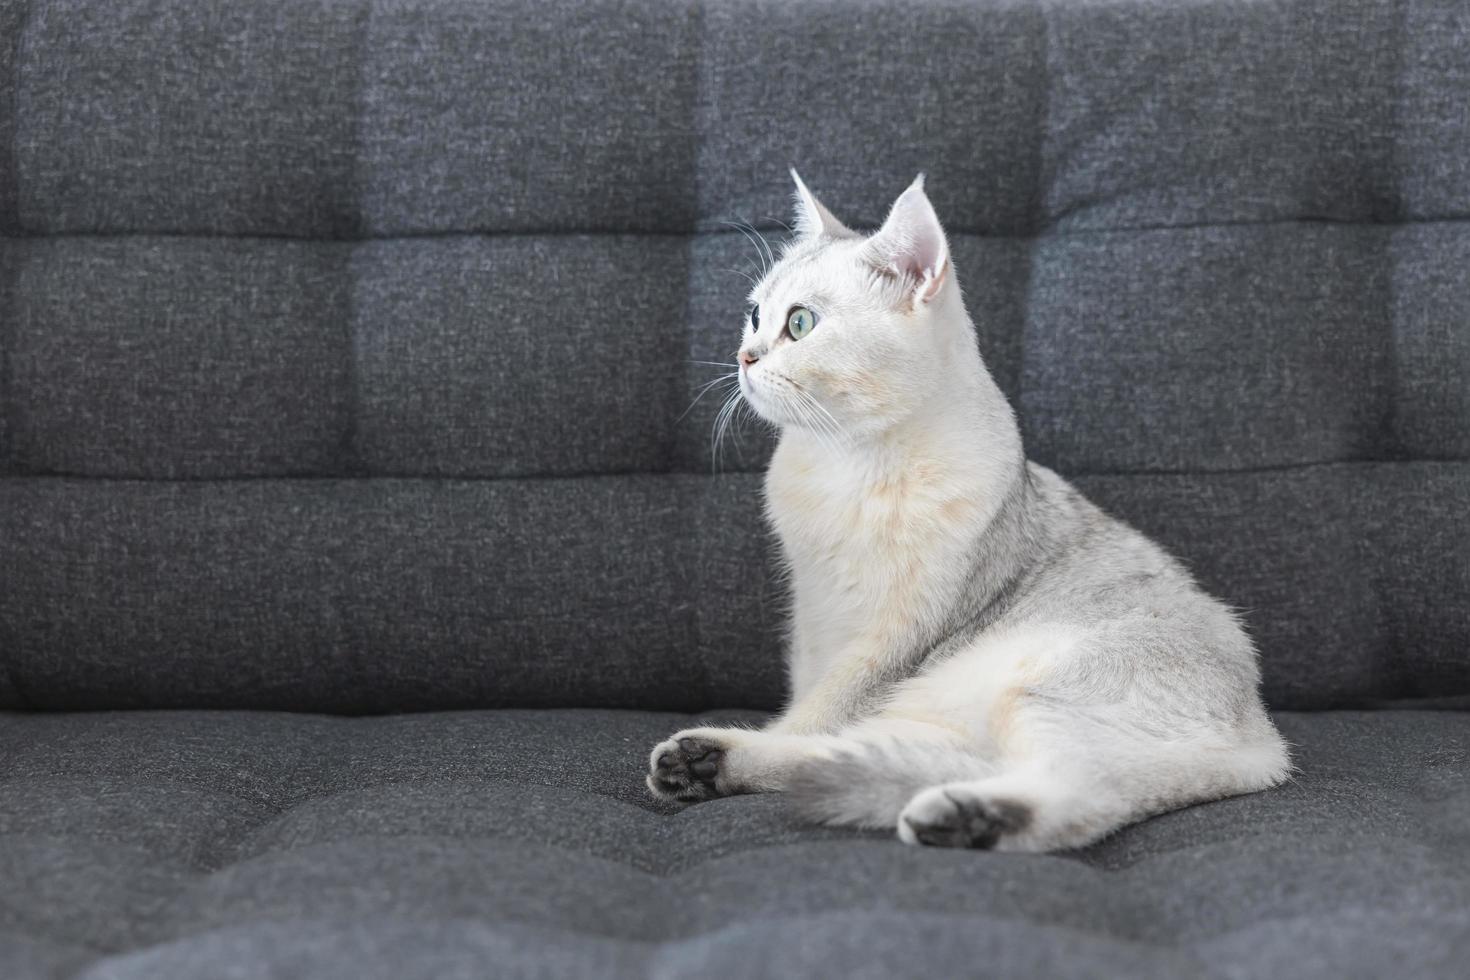 Cat cute with white short hair breed of British purebred. The Kitten pet is adorable sitting on a sofa looking camera eyes yellow-green. Feline mammals are fluffy and playful. photo